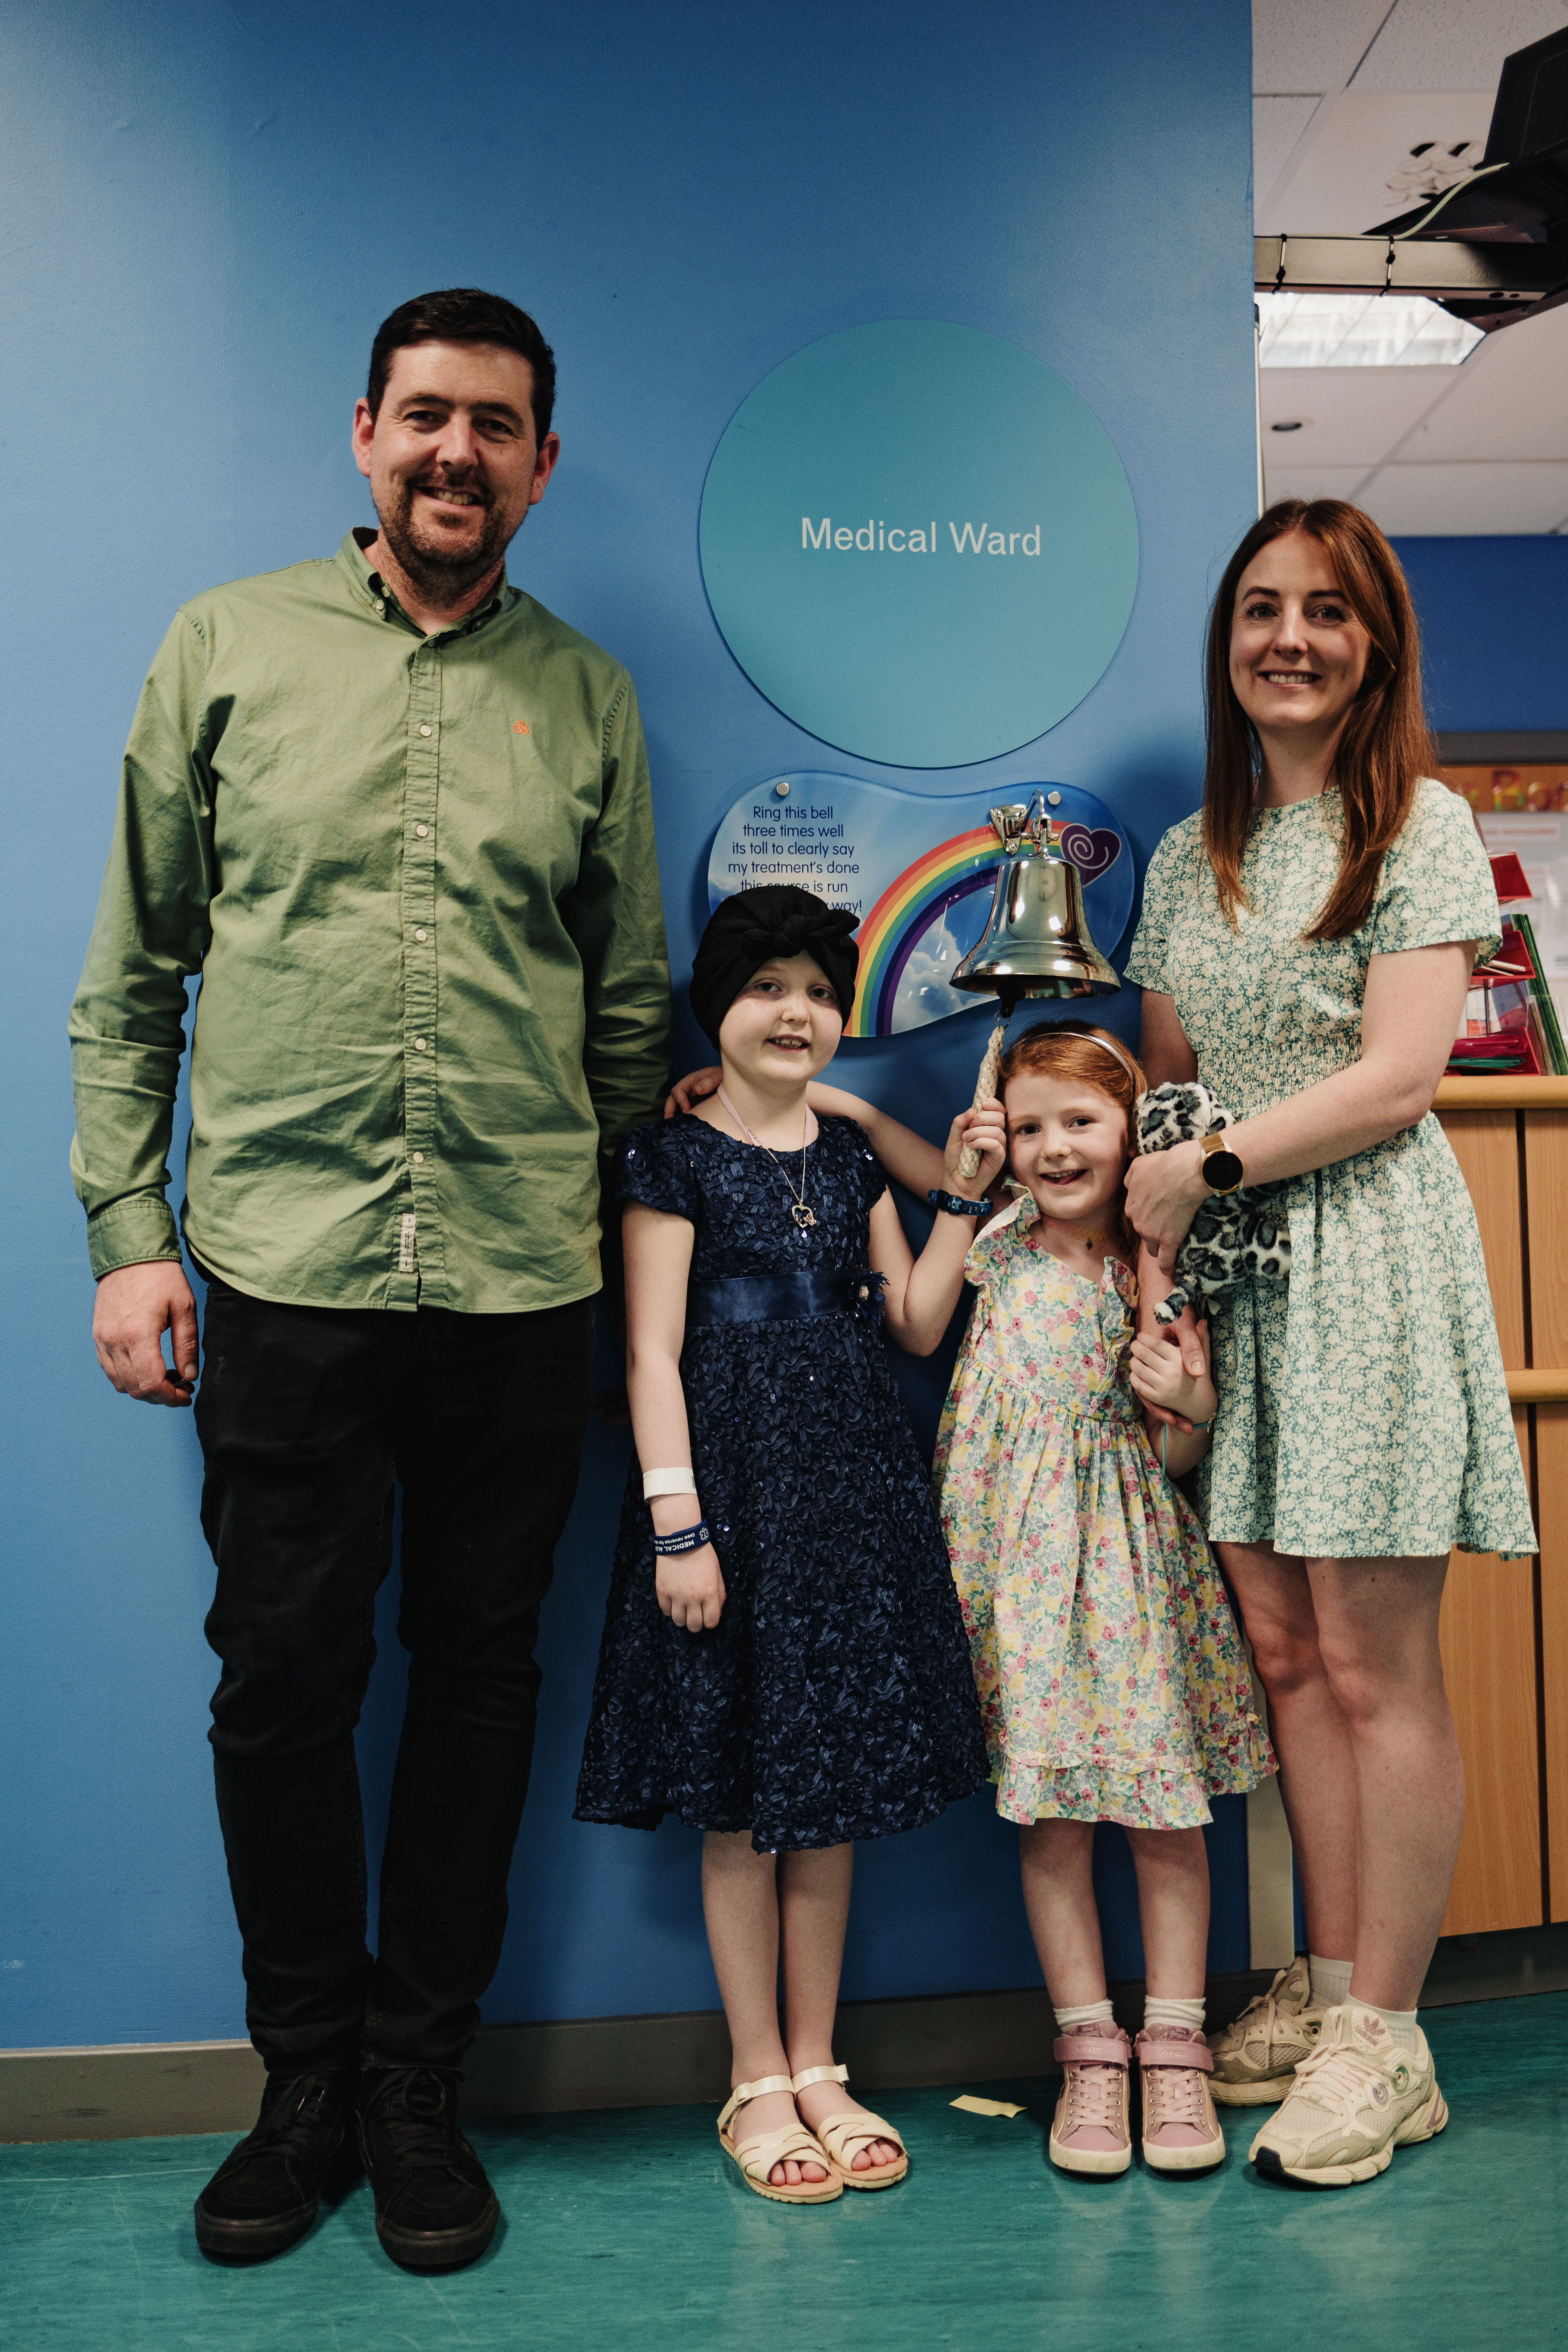 Aurora rang the bell to signal the end of treatment with her parents and little sister by her side. 